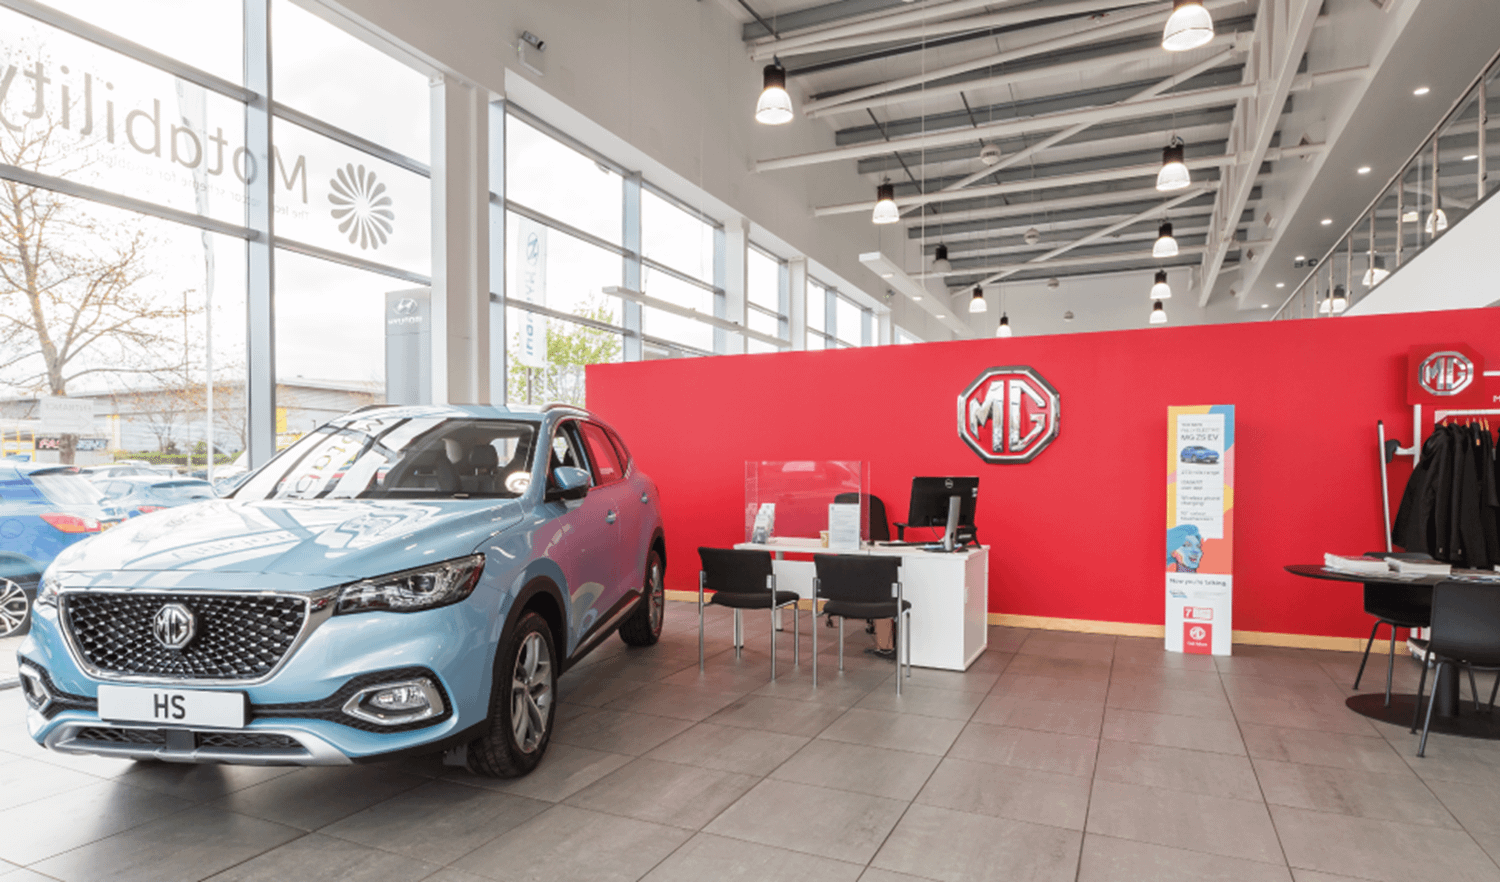 MG Guildford - Showroom - Interior